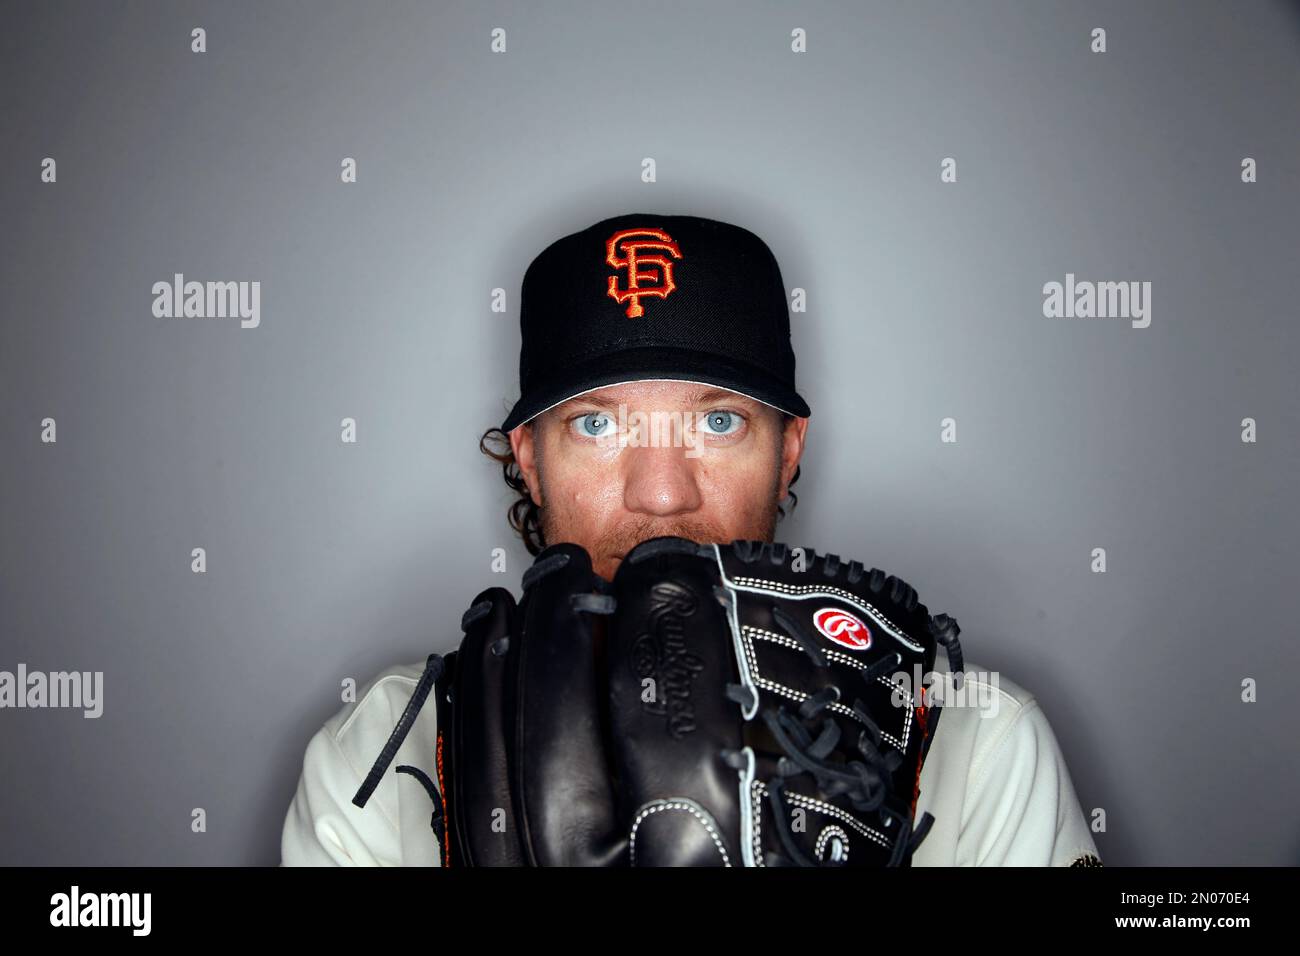 This is a 2016 photo of Jake Peavy of the San Francisco Giants baseball  team. This image reflects the 2016 active roster as of Sunday, Feb. 28, 2016  when this image was